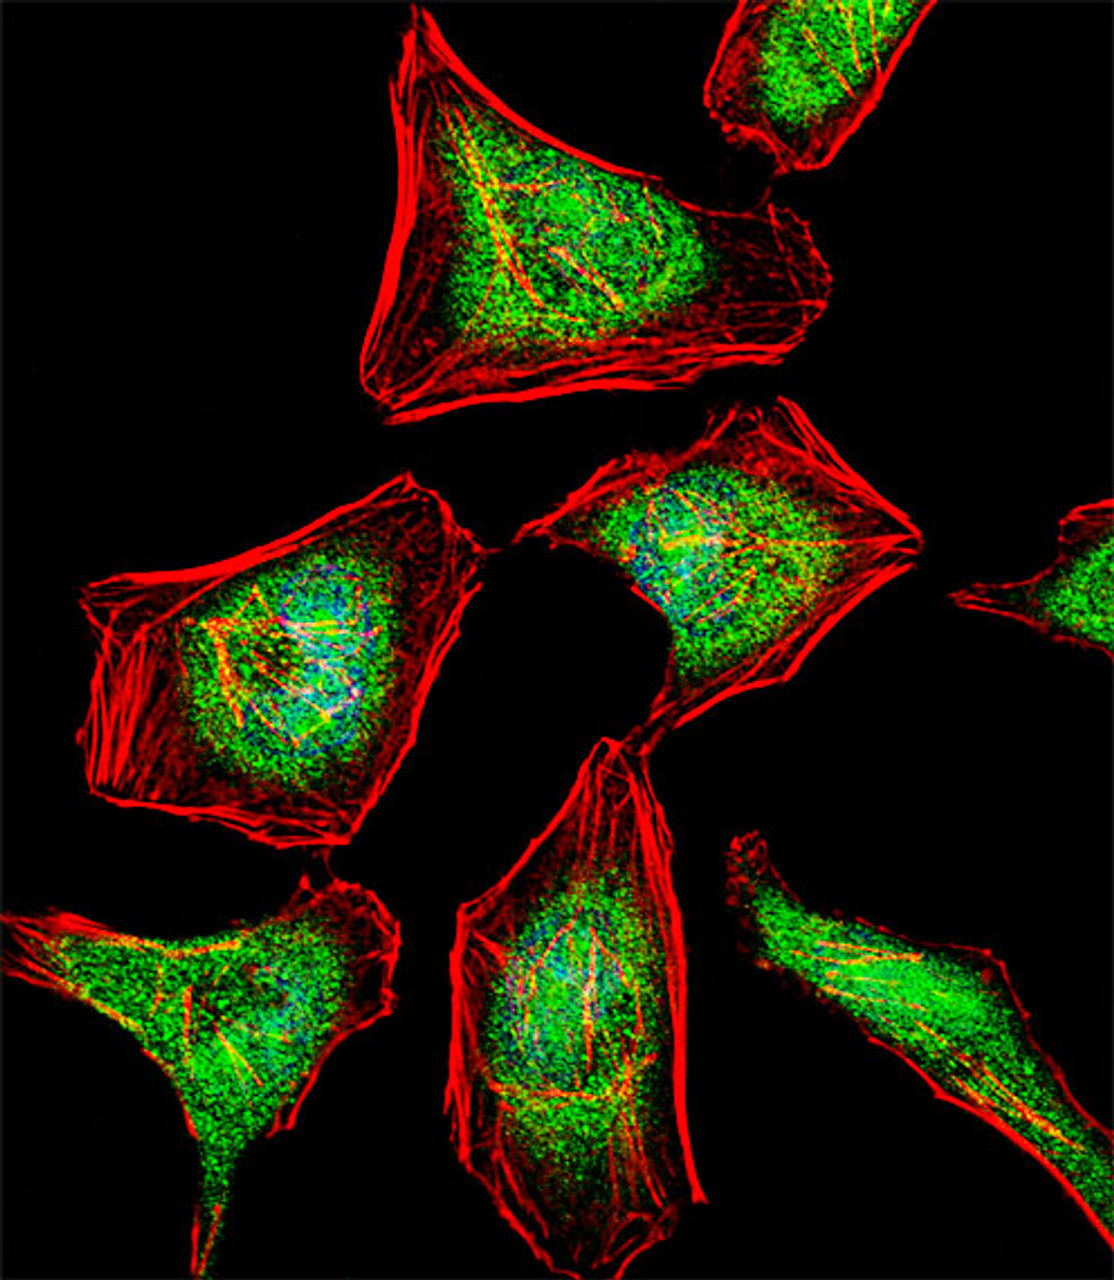 Fluorescent confocal image of Hela cell stained with ATF7 Antibody (N-term) .Hela cells were fixed with 4% PFA (20 min) , permeabilized with Triton X-100 (0.1%, 10 min) , then incubated with ATF7 primary antibody (1:25) . For secondary antibody, Alexa Fluor 488 conjugated donkey anti-rabbit antibody (green) was used (1:400) .Cytoplasmic actin was counterstained with Alexa Fluor 555 (red) conjugated Phalloidin (7units/ml) . Nuclei were counterstained with DAPI (blue) (10 ug/ml, 10 min) .ATF7 immunoreactivity is localized to Nucleus and Cytoplasm significantly.